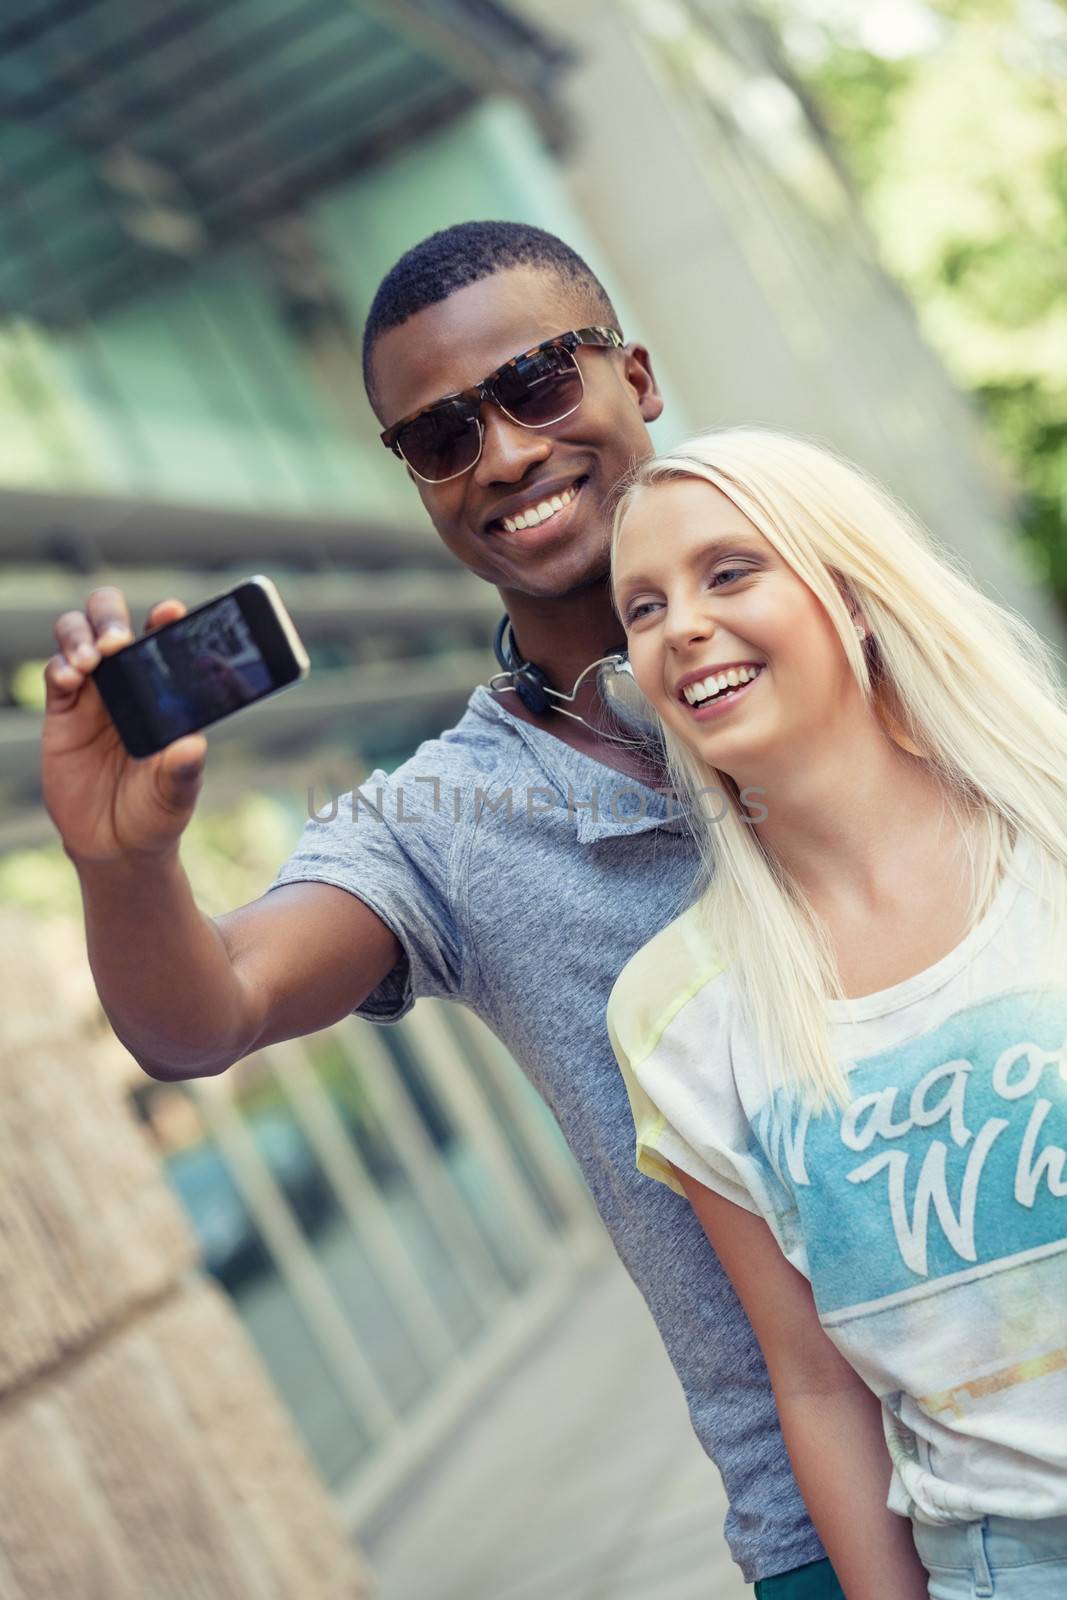 young smiling multiracial couple taking foto by smartphone outdoor in summer